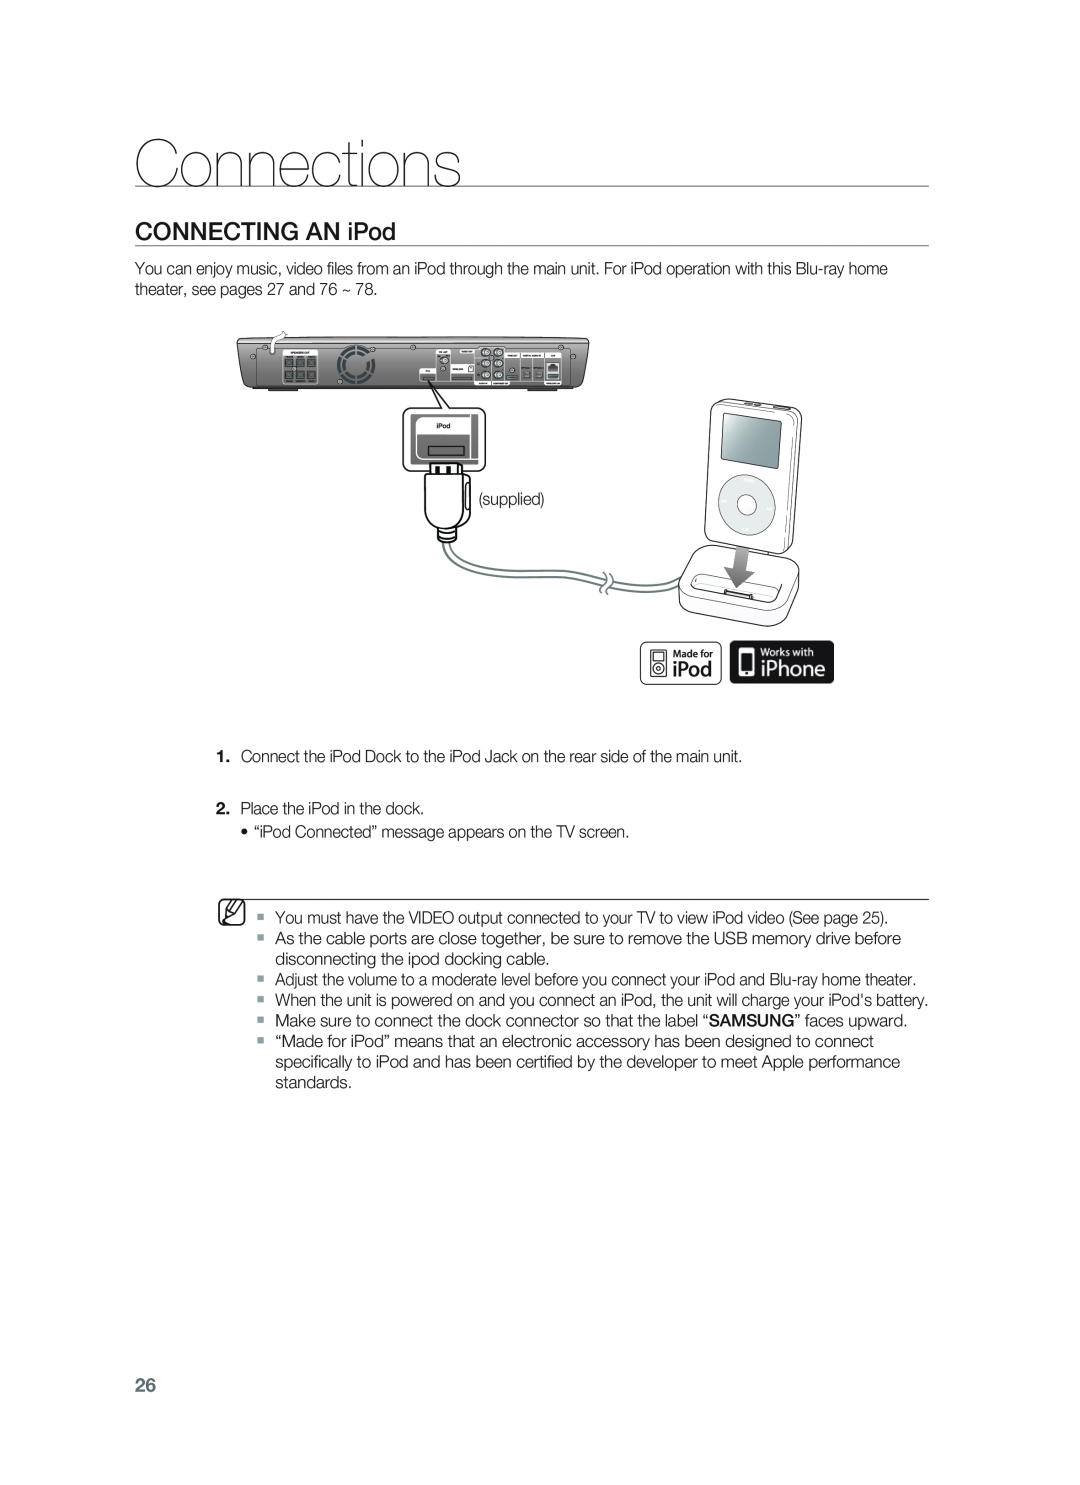 Samsung HT-BD1255, HT-BD1252 user manual CONNECTING AN iPod, Connections 